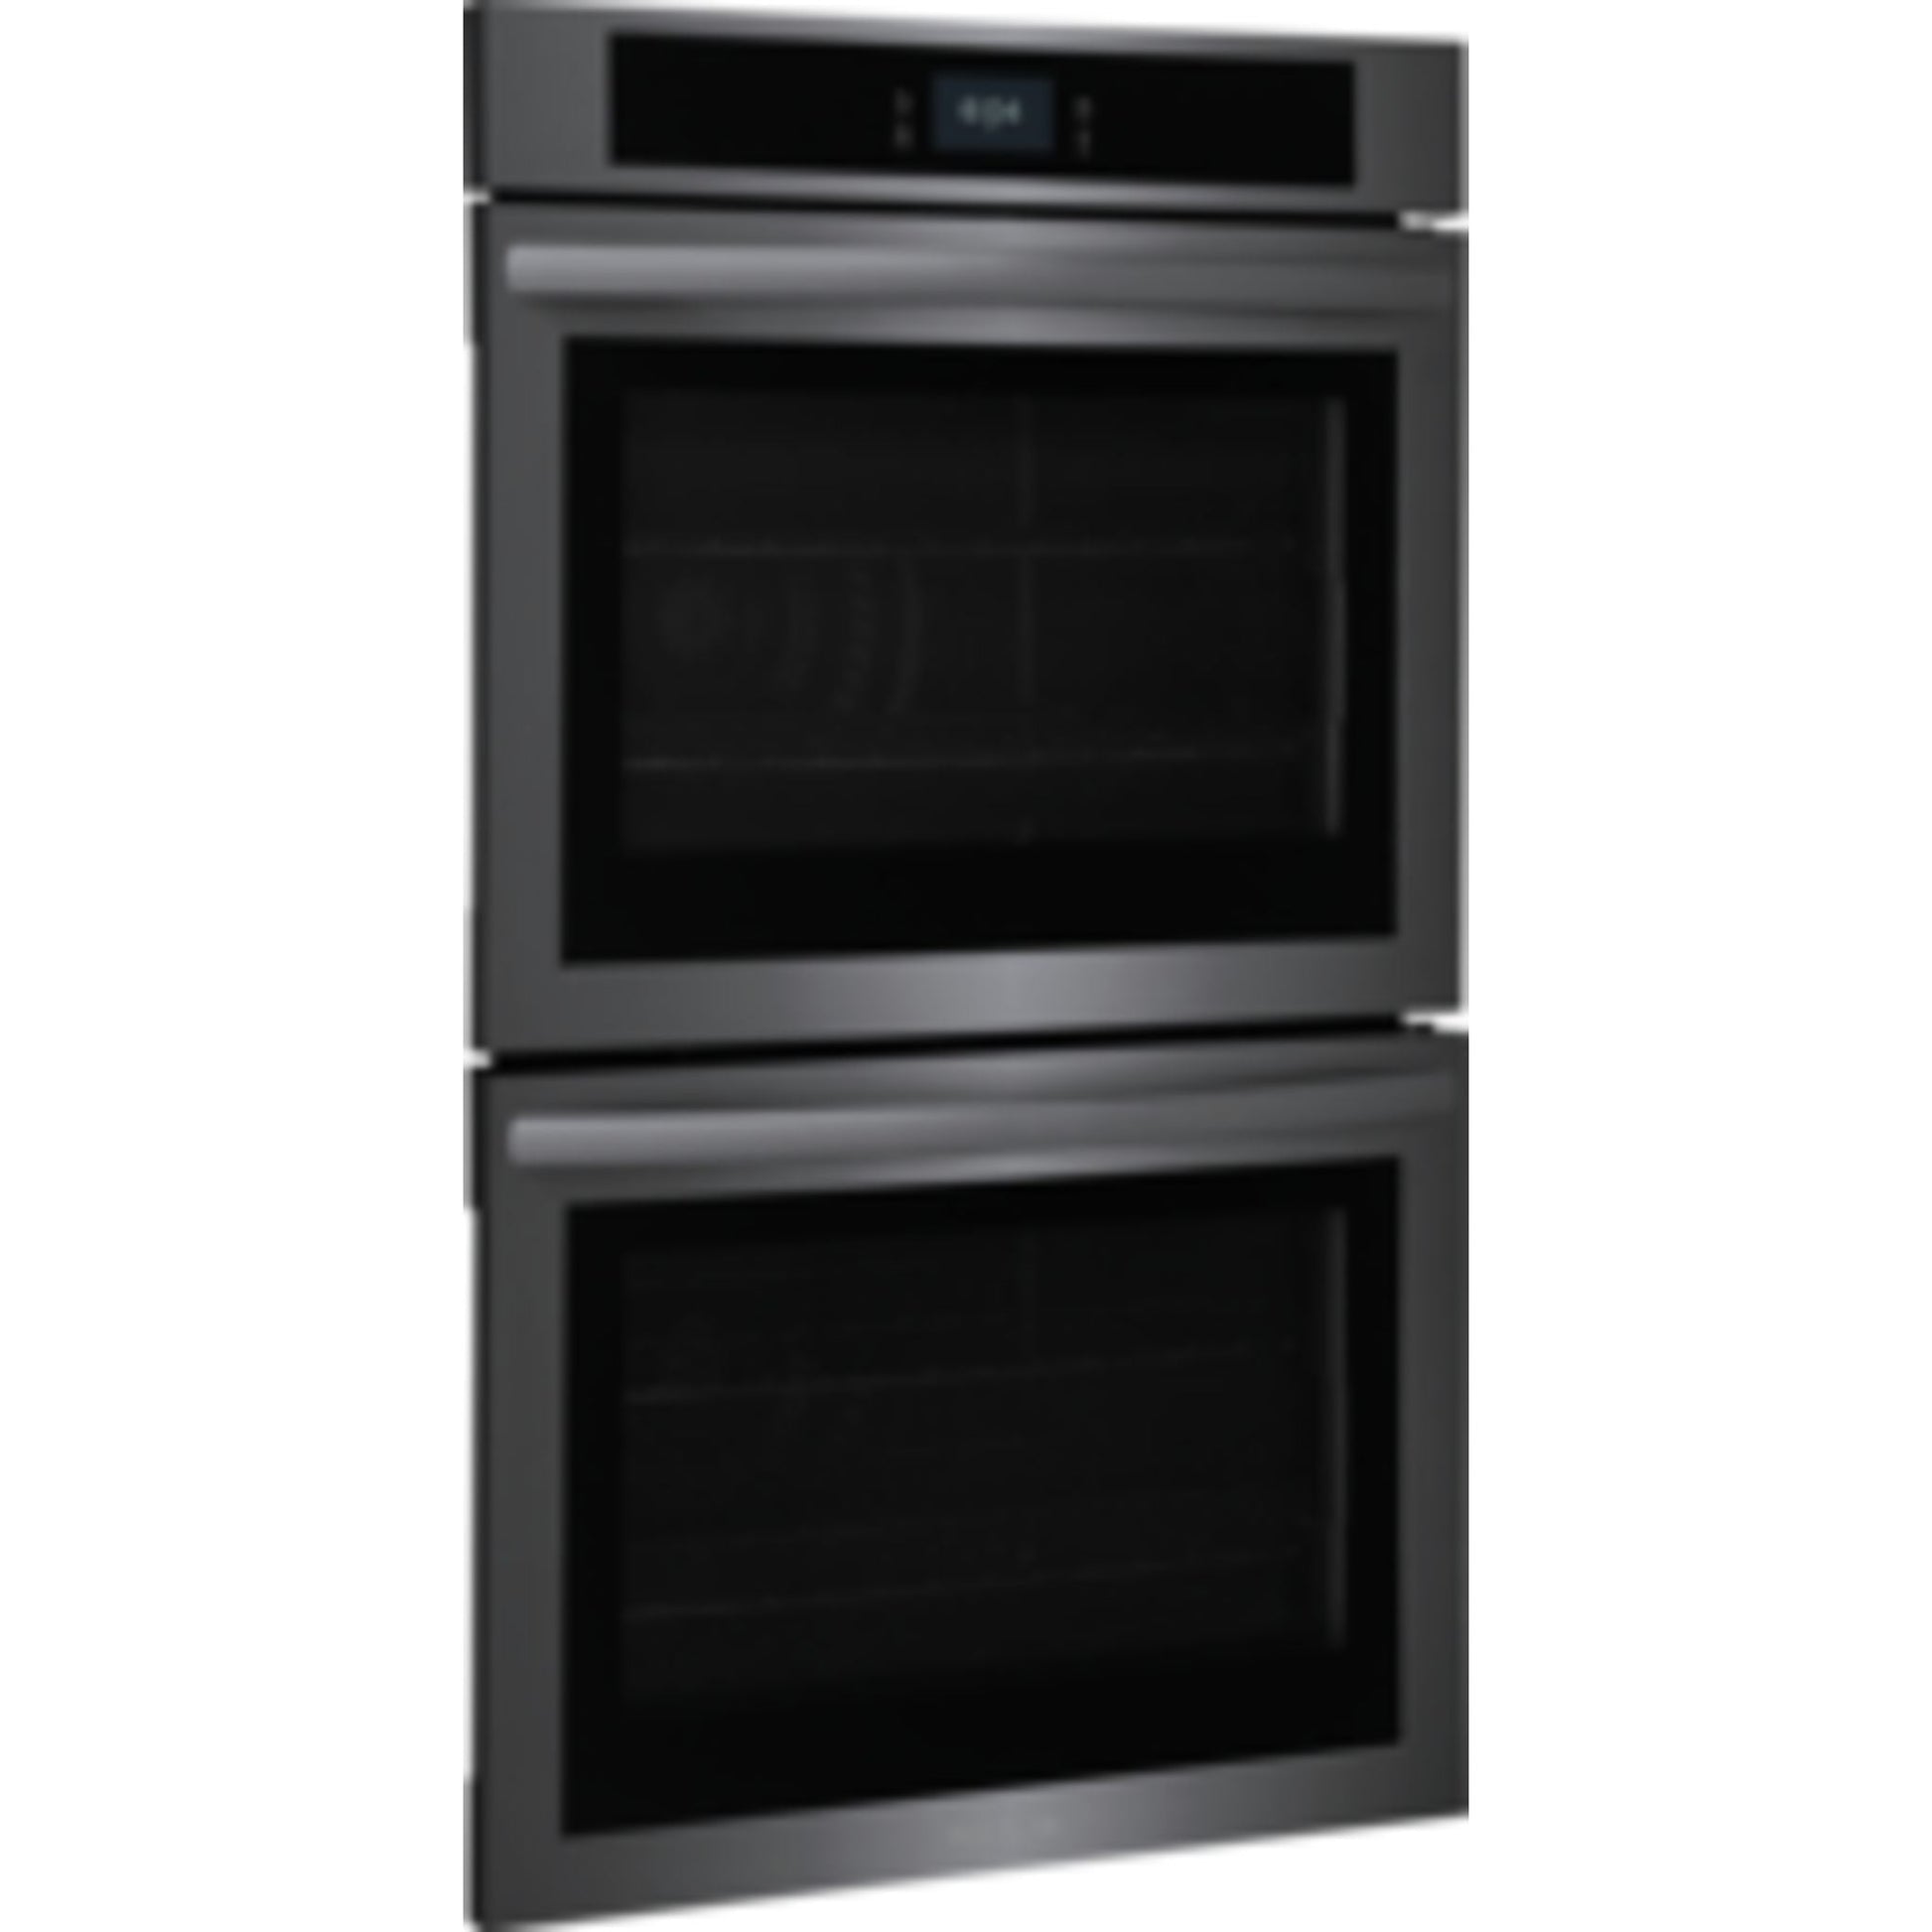 Frigidaire 30" Convection Wall Oven (FCWD3027AD) - Black Stainless